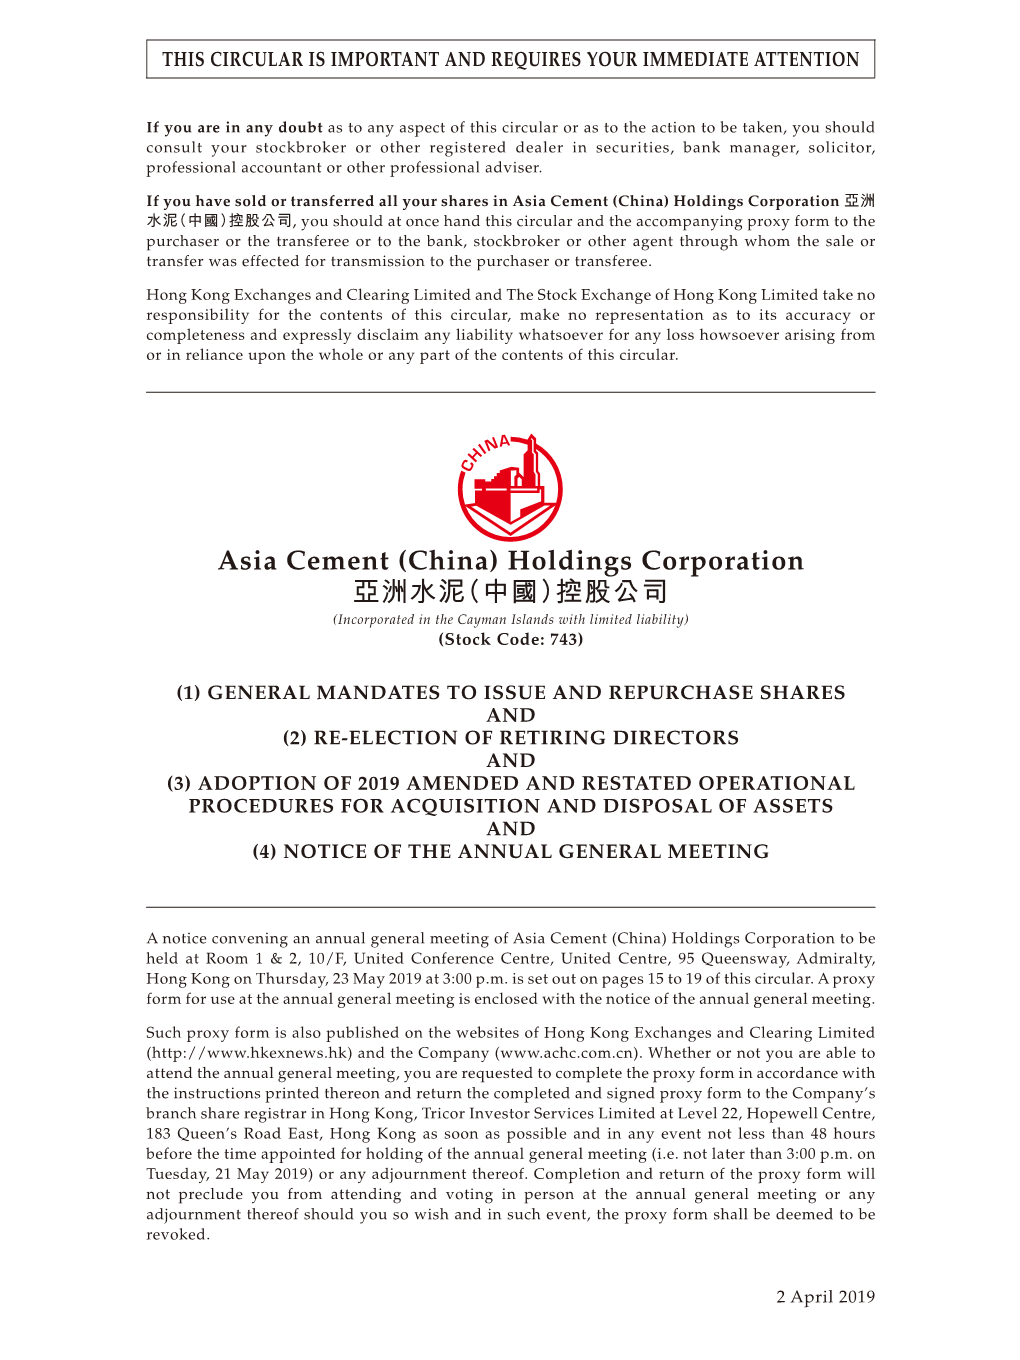 Asia Cement (China) Holdings Corporation 亞洲水泥（中國）控股公司 (Incorporated in the Cayman Islands with Limited Liability) (Stock Code: 743)